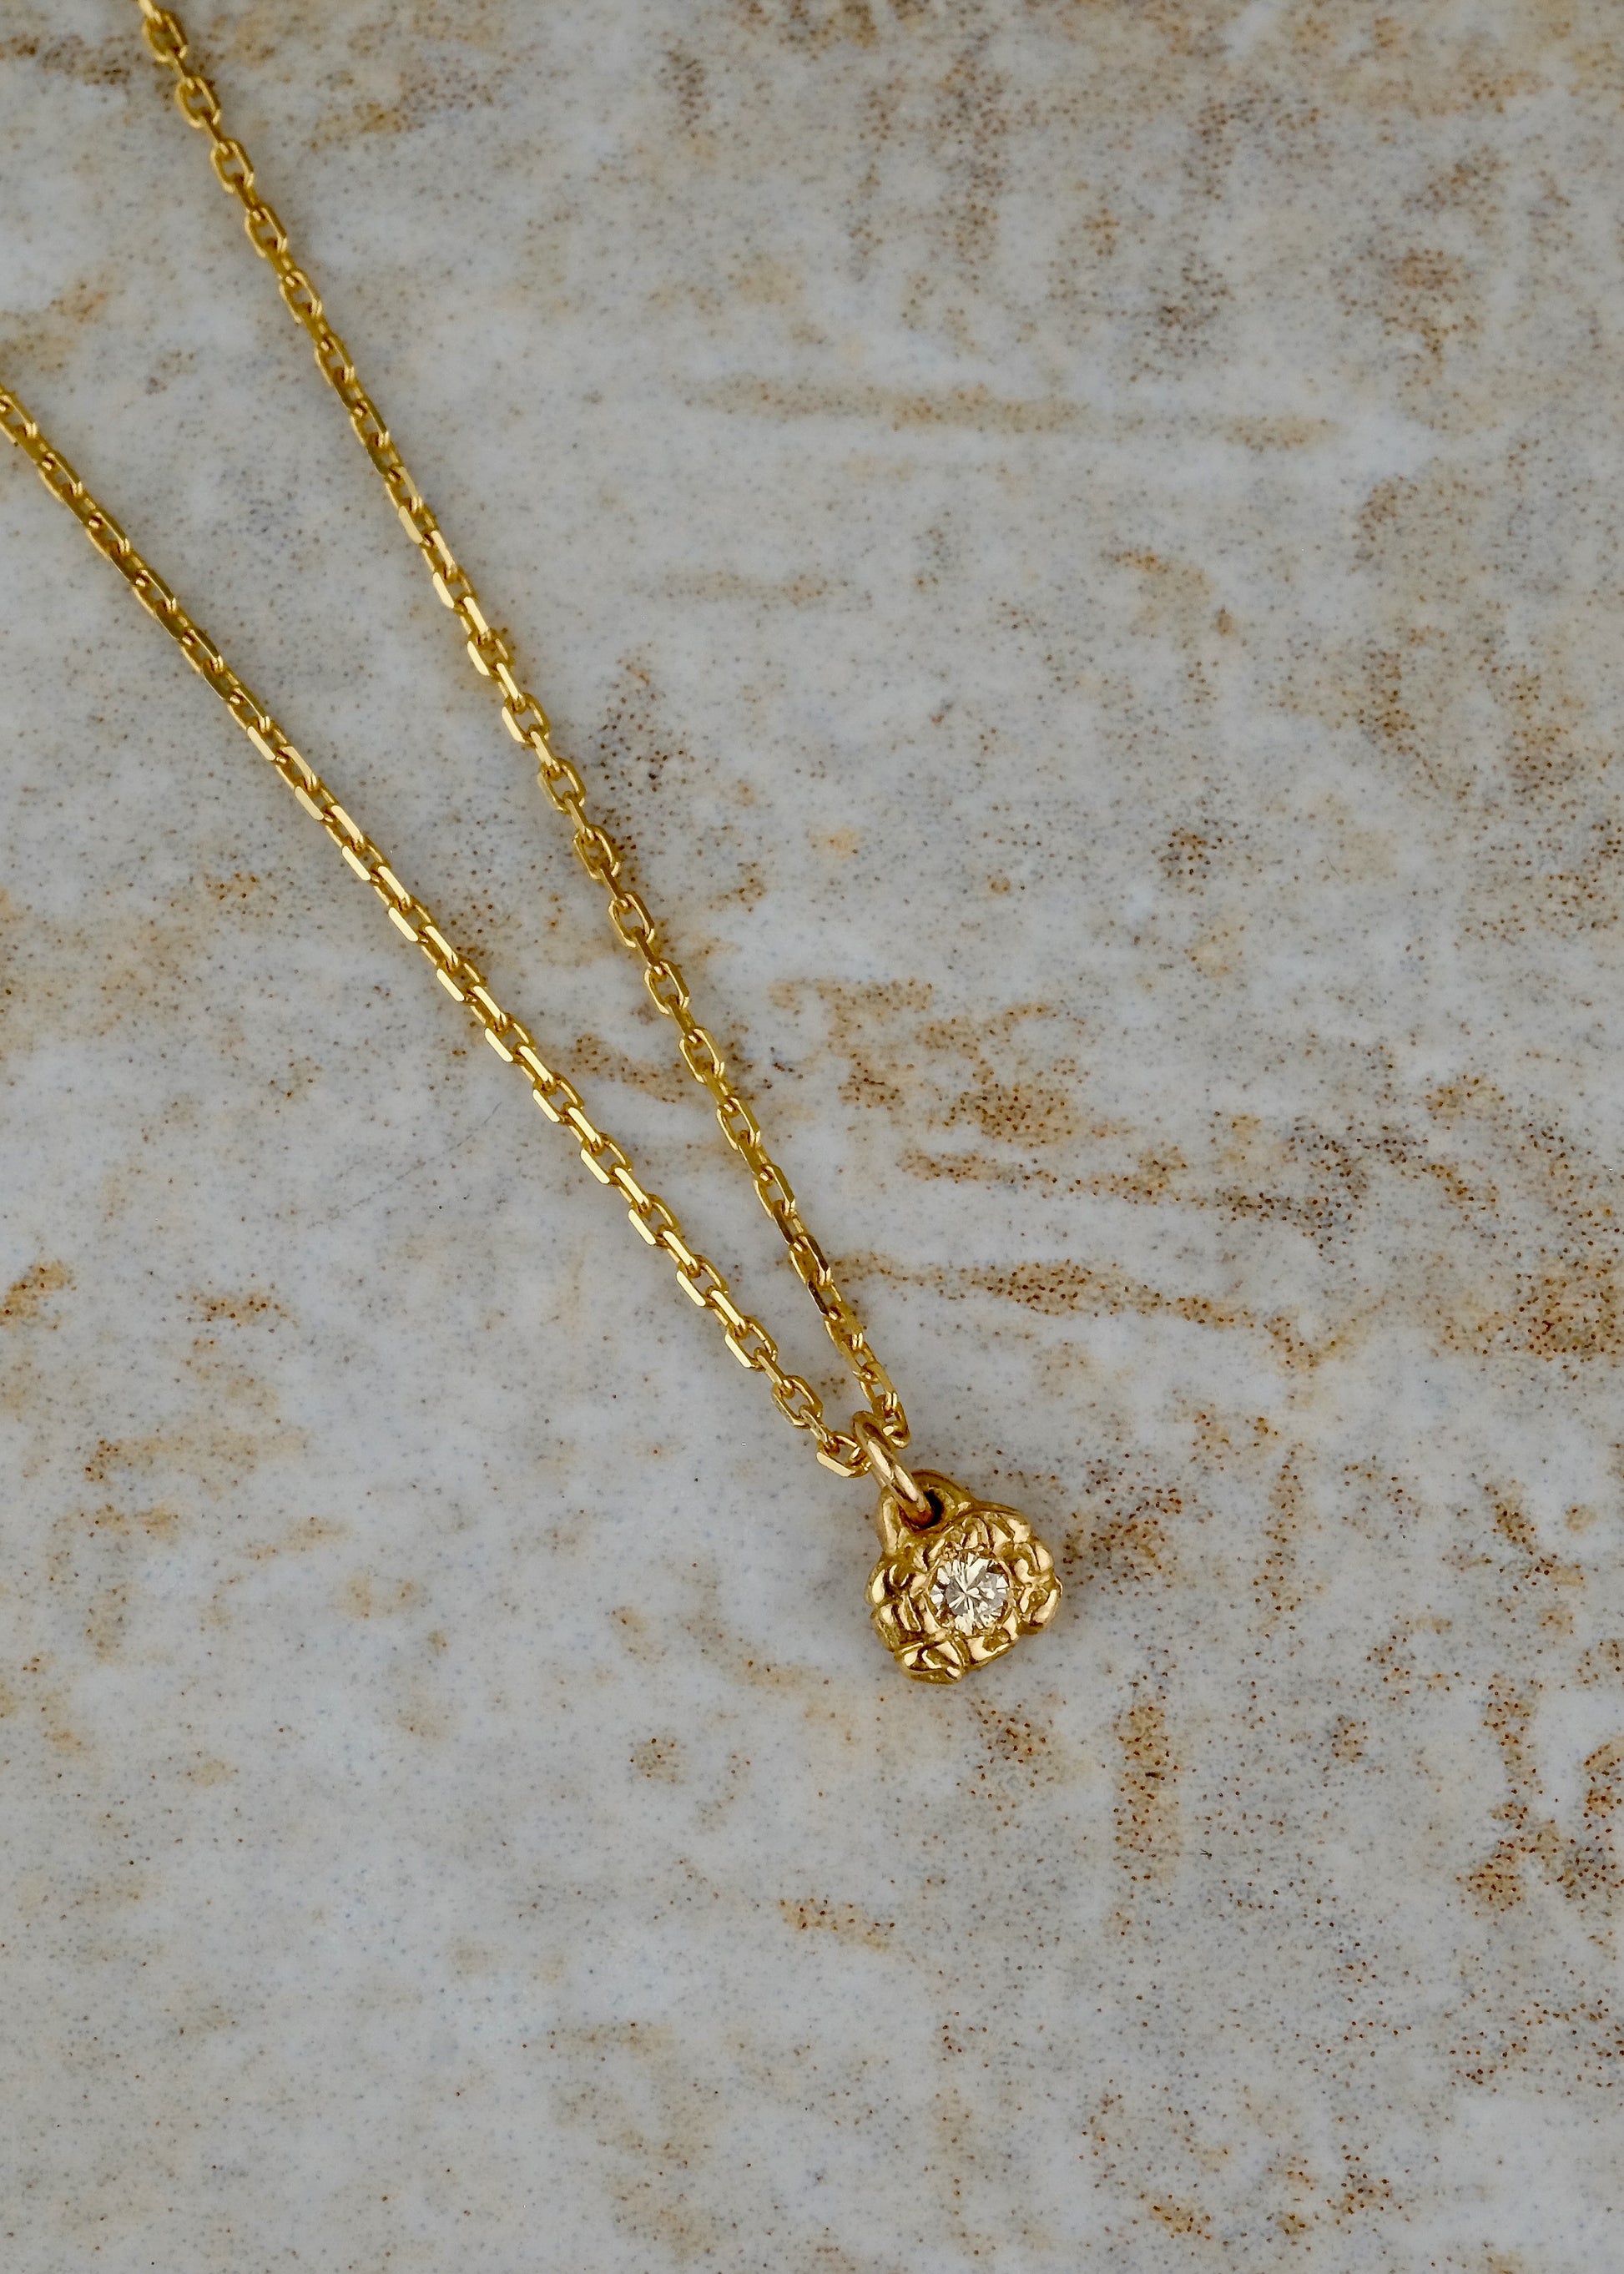 Textured gold, hand-carved to reveal its lustre, surrounds a gleaming diamond to create the Barre necklace—an essential and elegant design that calls to mind the effortless grace of a ballerina at the barre.